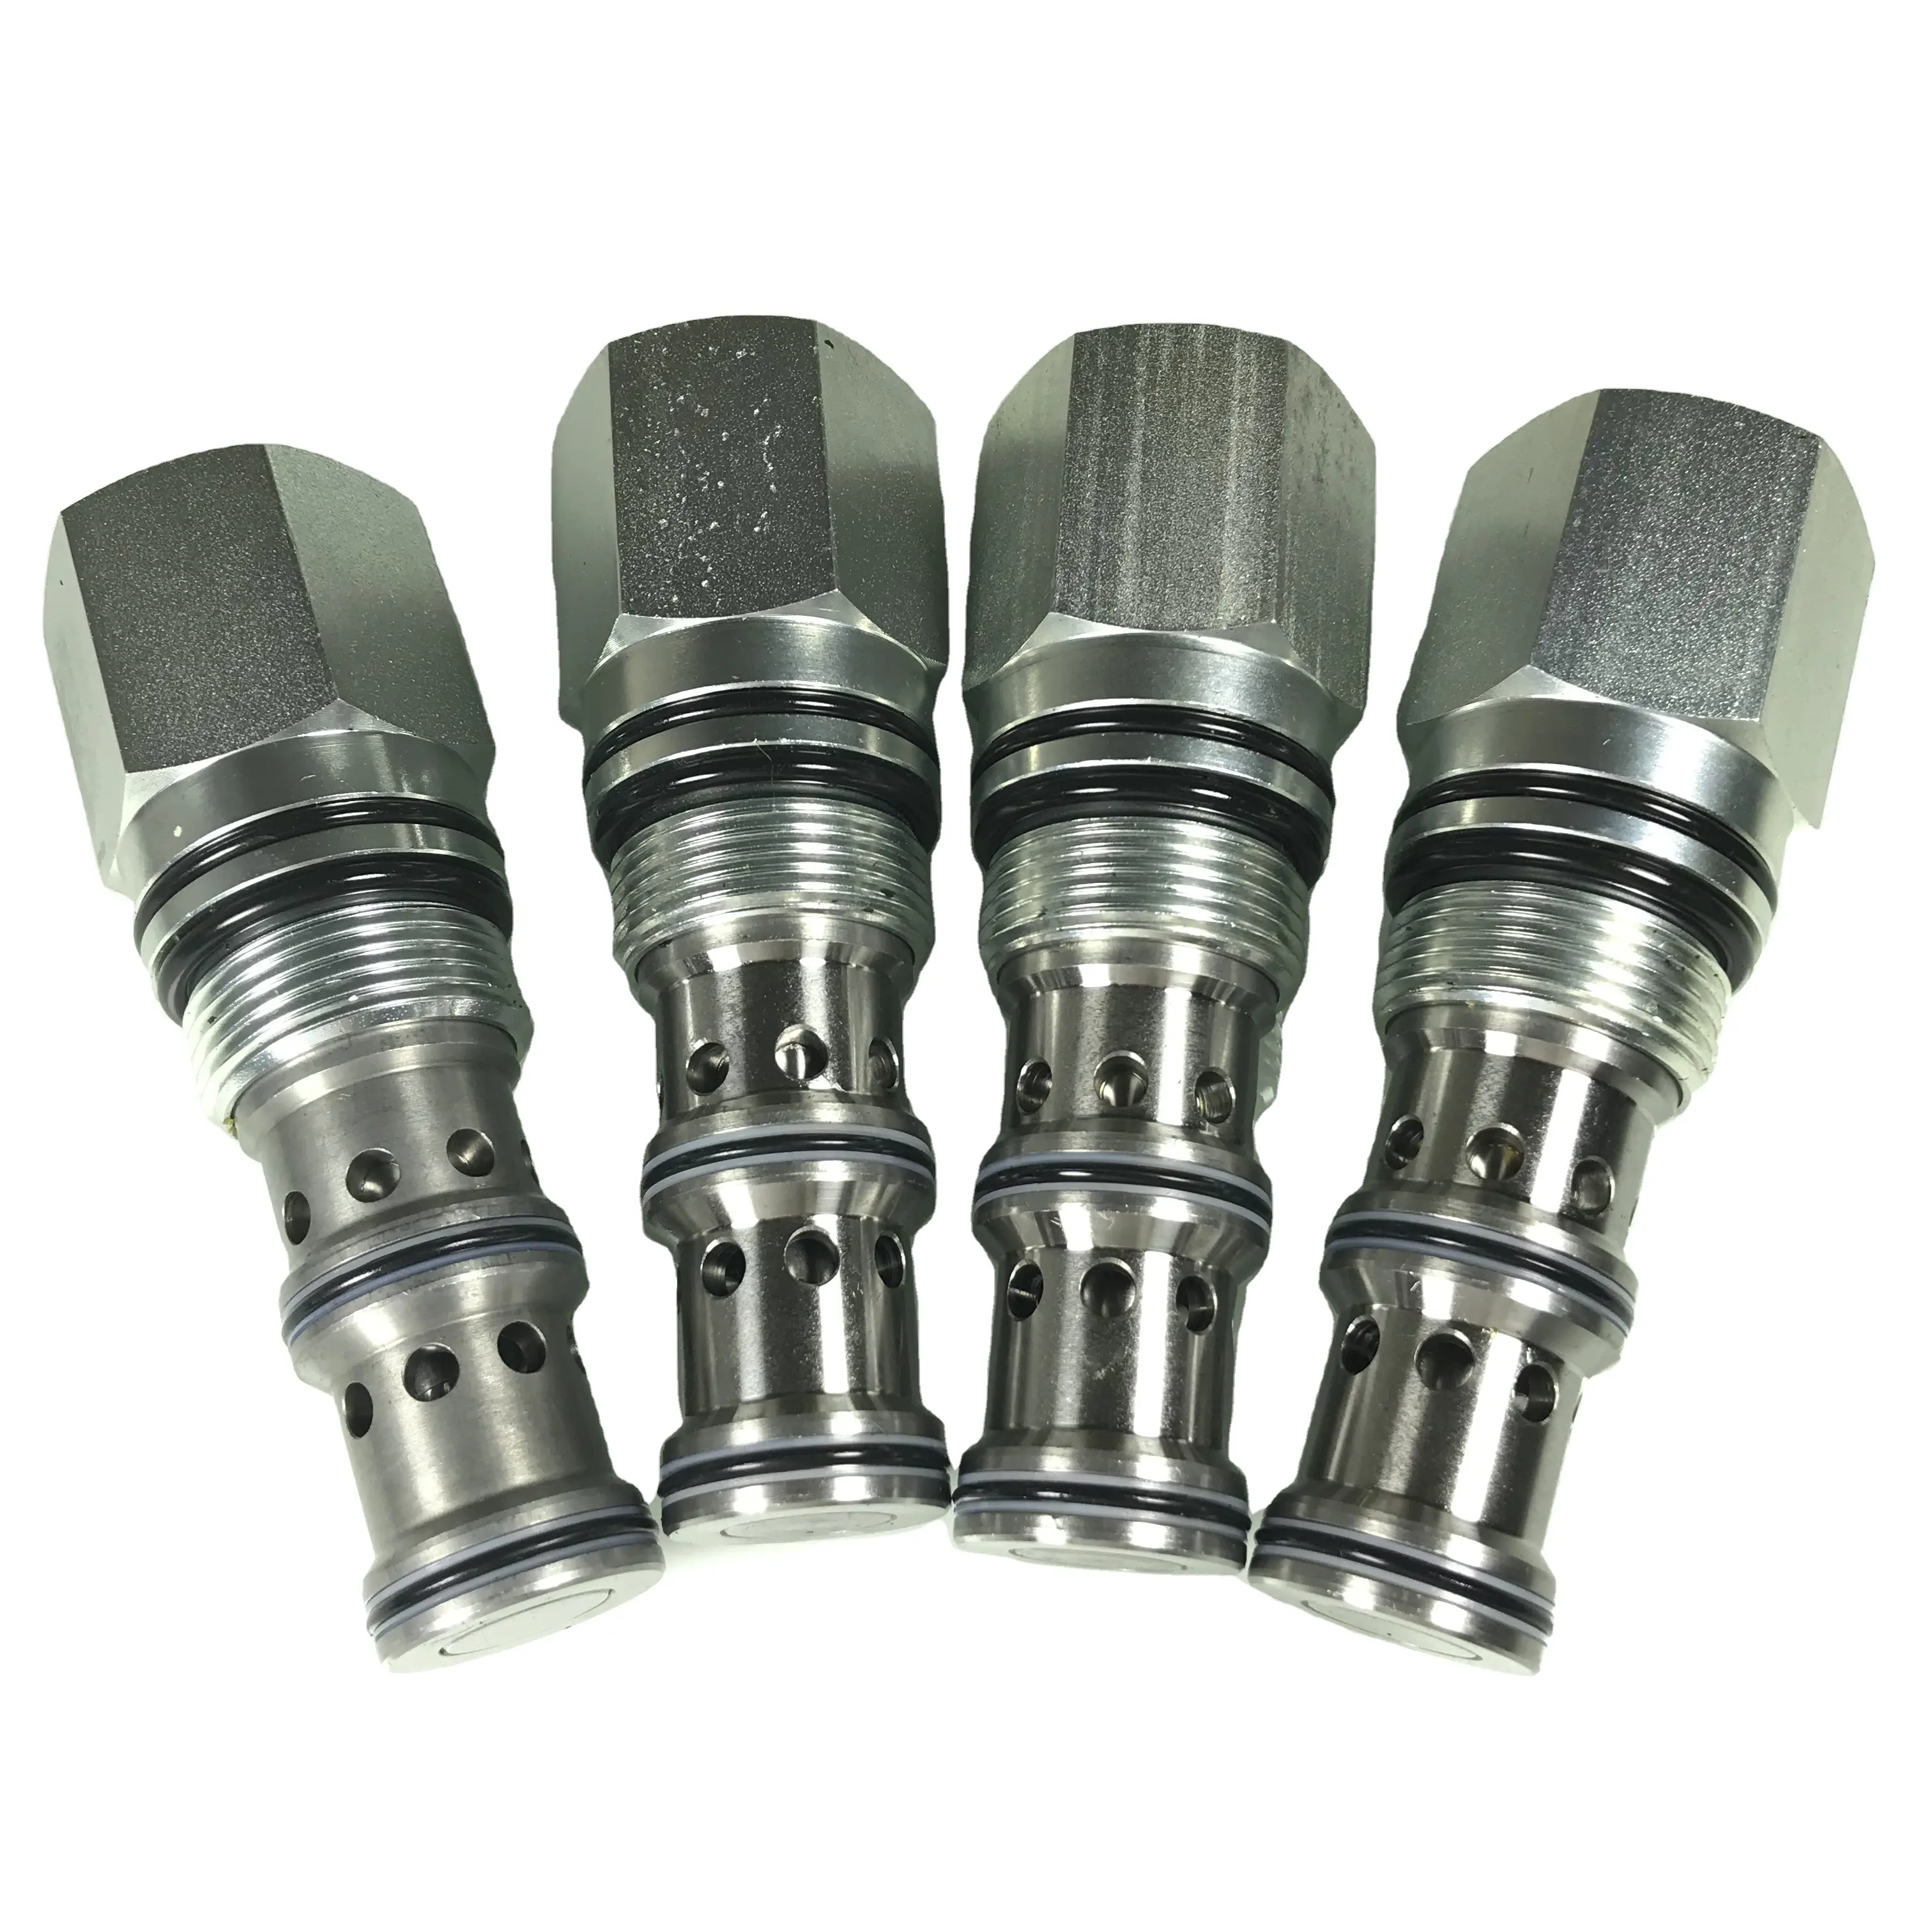 threaded hydraulic cartridge Valves 2 position 2 way Atmospheric Vent PD16-34 Directional Controls Piloted normally closed